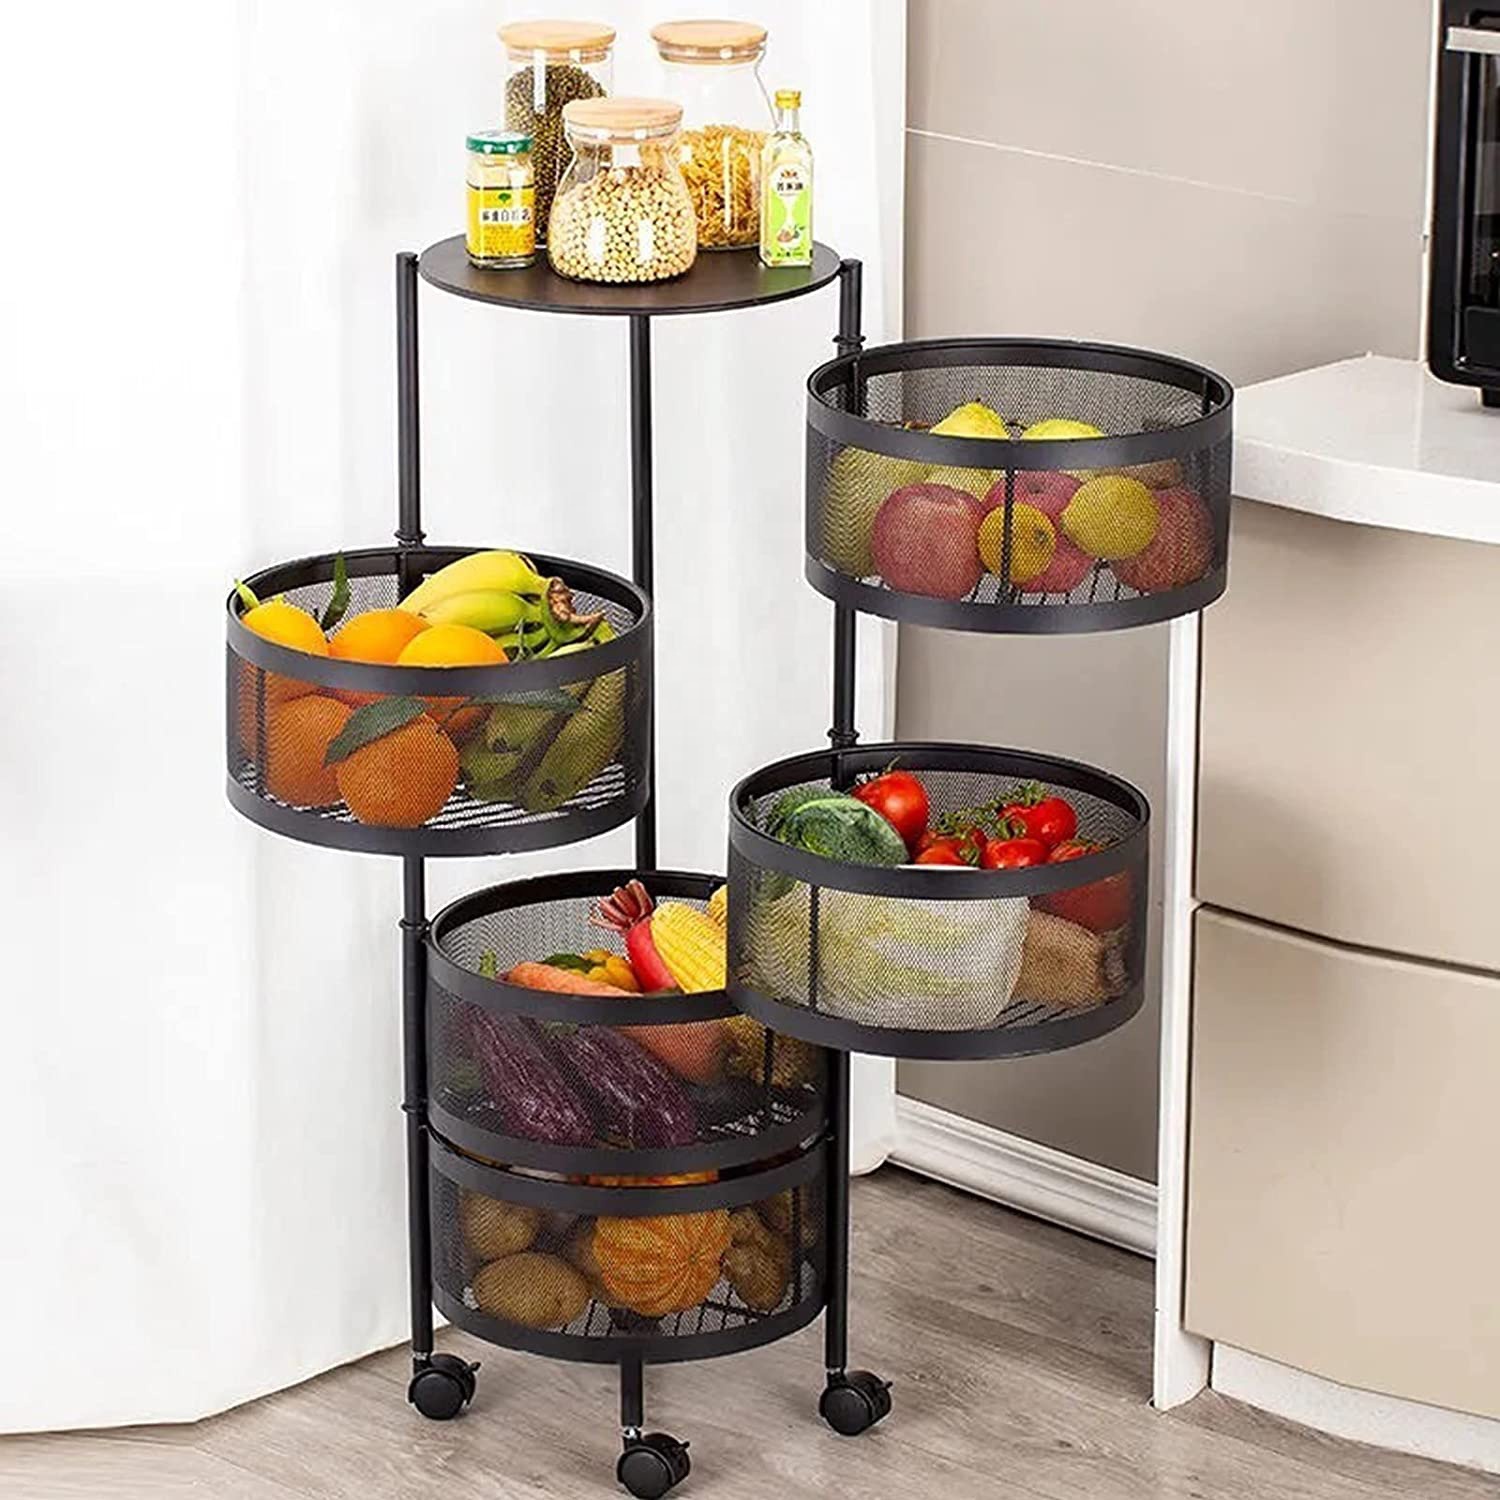 4 Tires Kitchen Storage Rotary Rack Trolley Cart Rotating Round drawer Vegetable